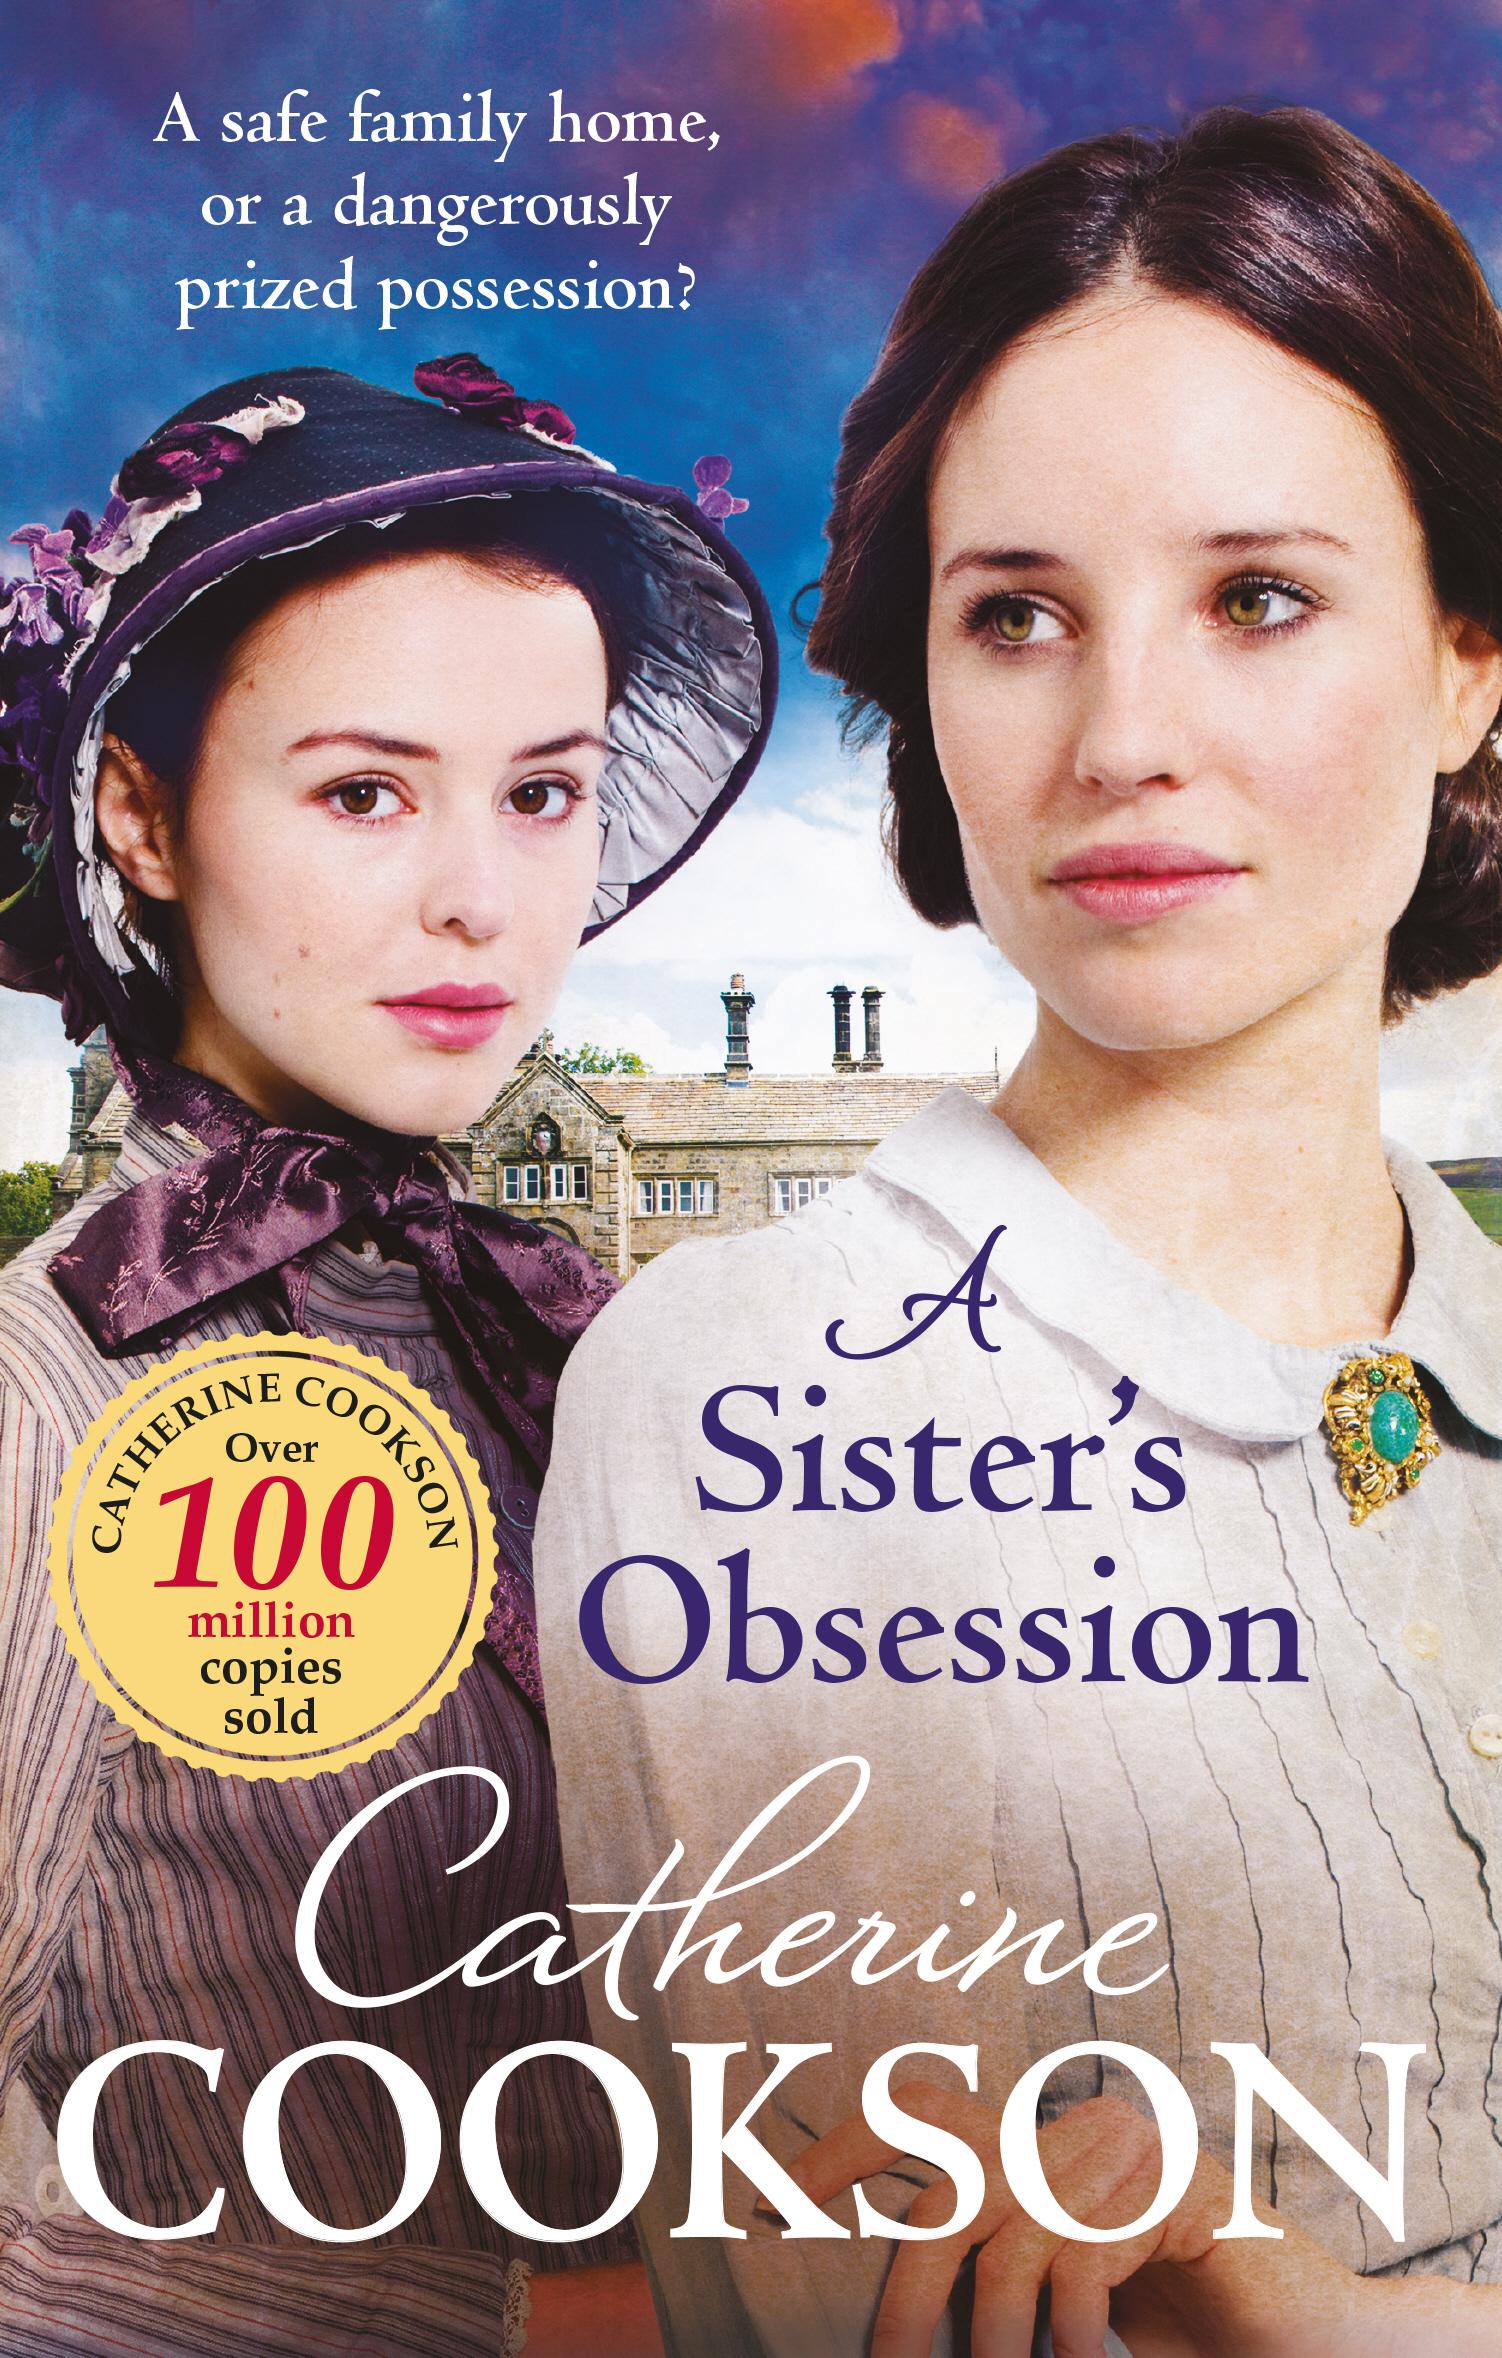 Sister's Obsession - Catherine Cookson